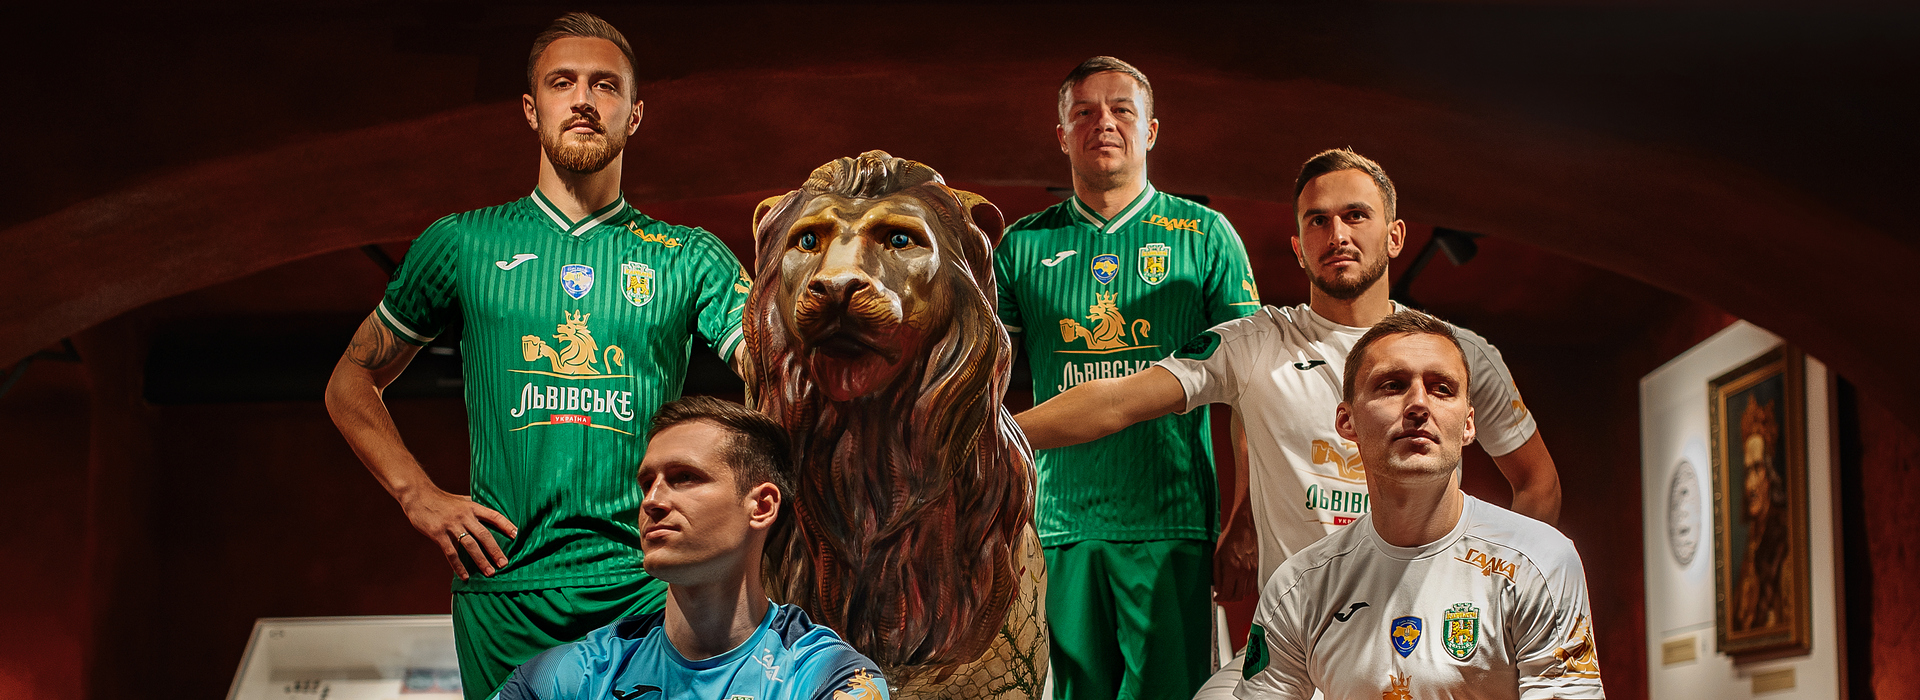 FC “Karpaty” Unconventionally Presented a New Uniform and Announced the Title Sponsor – the Brand “Lvivske”